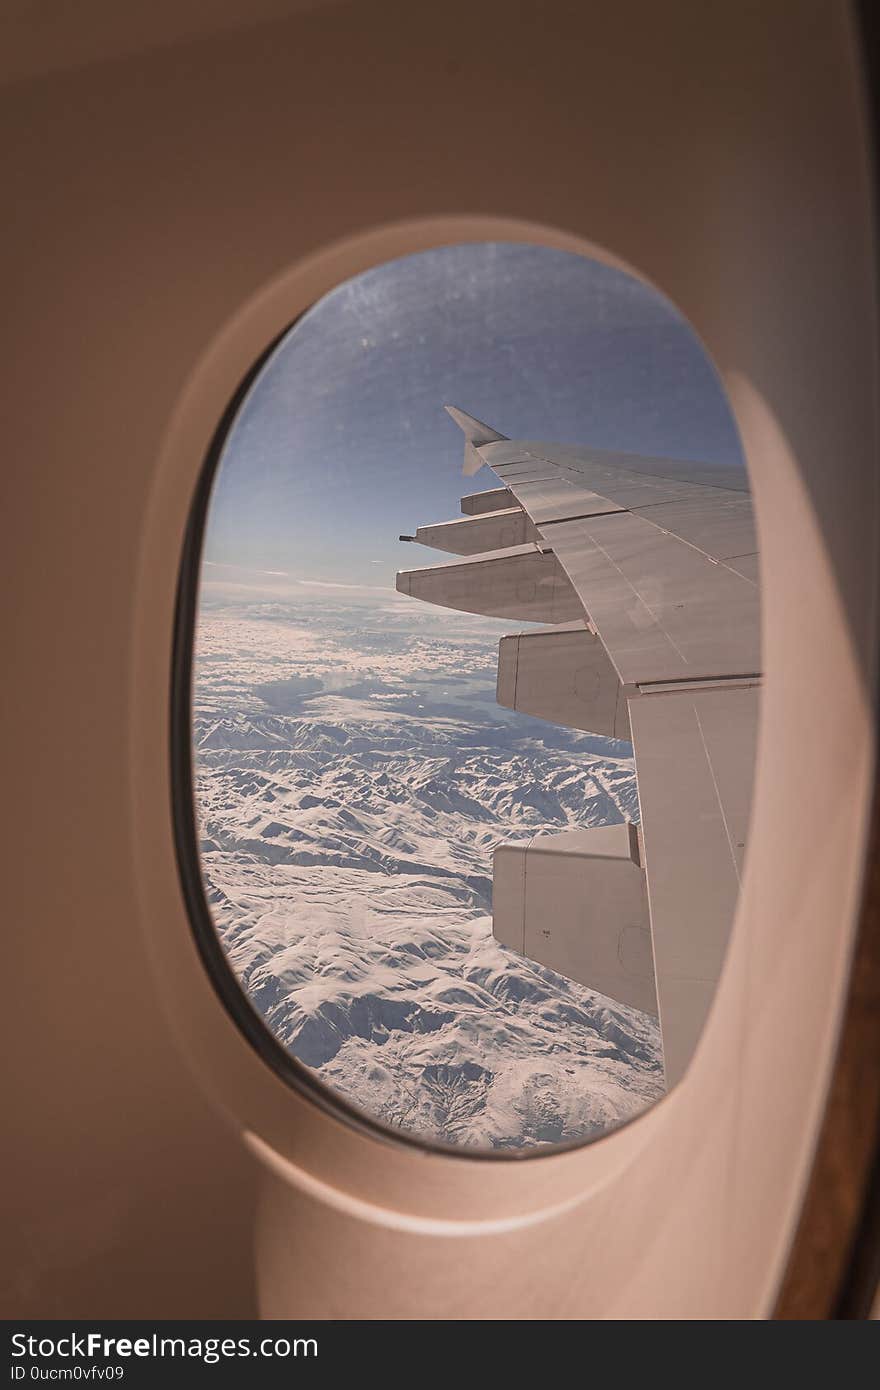 Looking outside an airplane window,